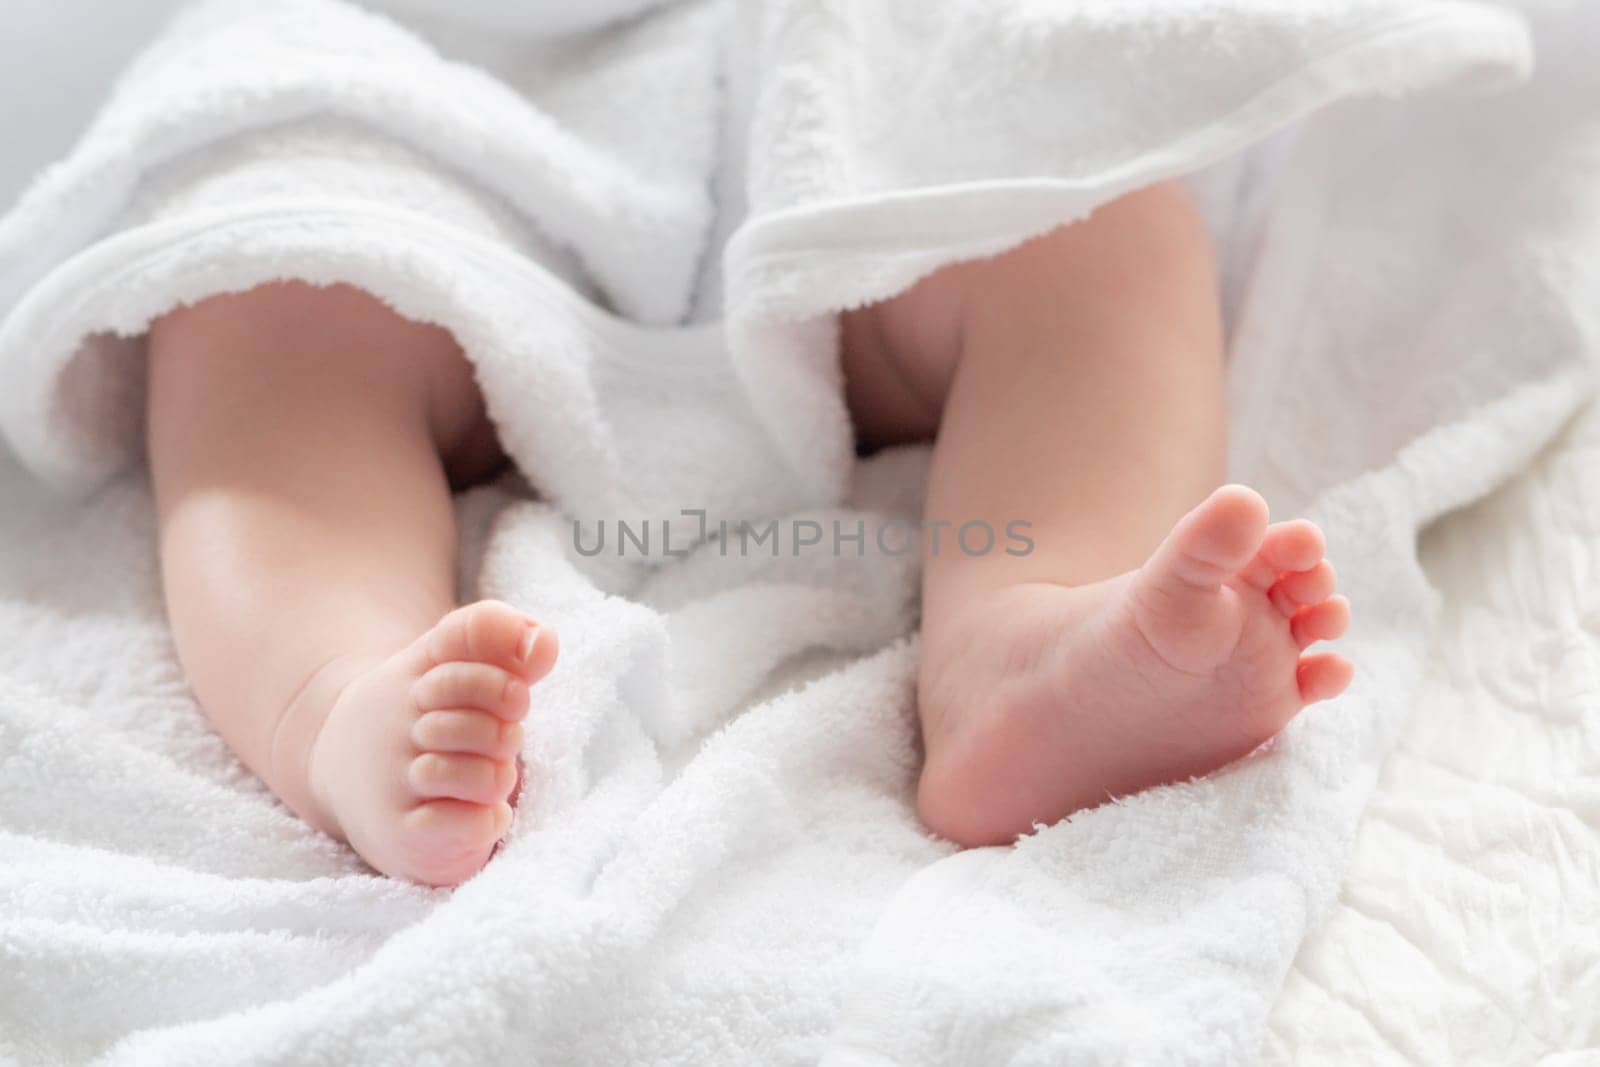 Fresh start showcased by baby's feet under white fabric. Concept of innocence and new journeys by Mariakray